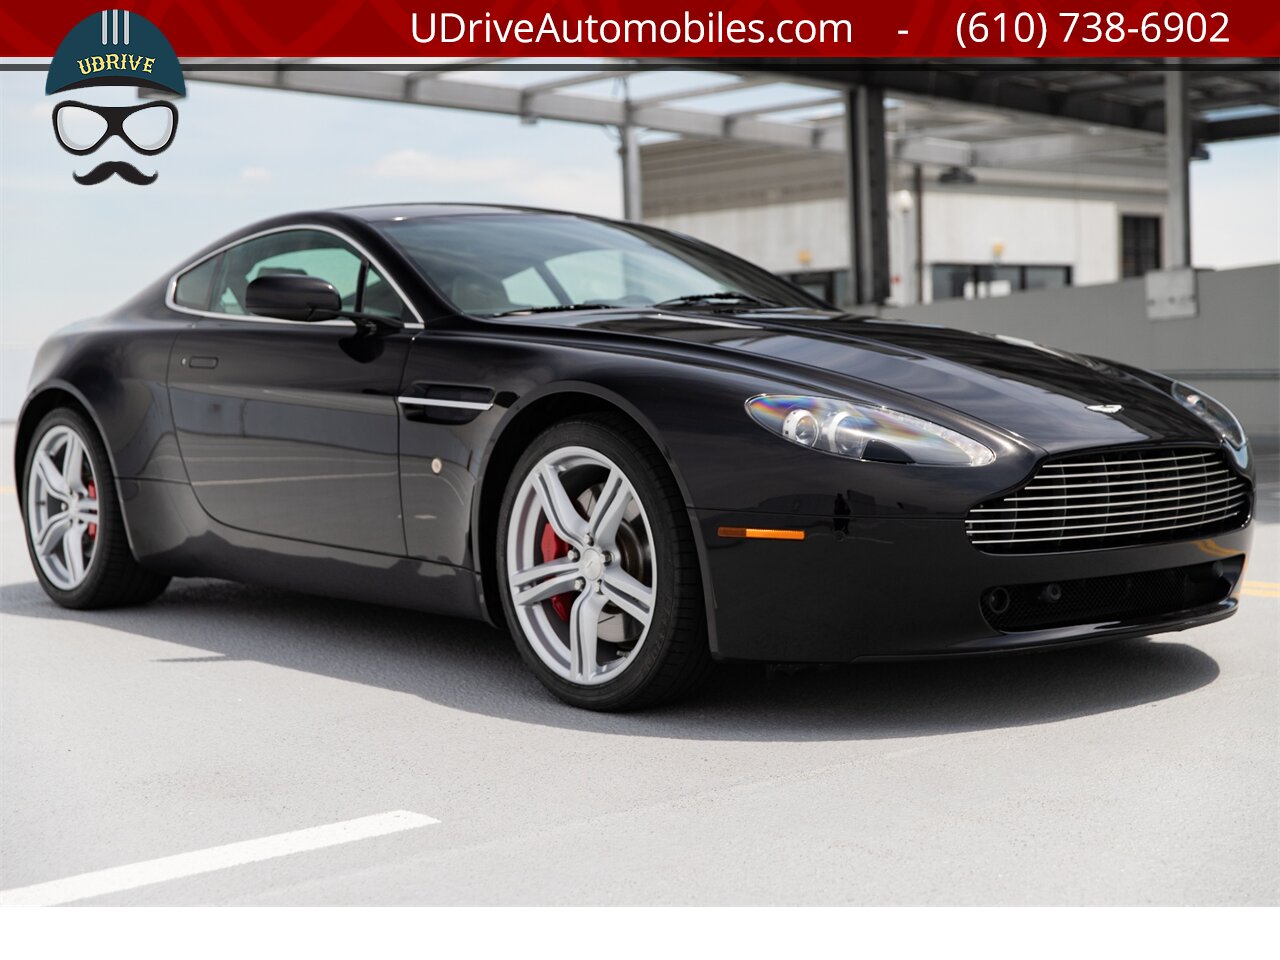 2009 Aston Martin Vantage 6 Speed Manual 1 Owner 12k Miles Sprts Pack NAV  $136,470 MSRP Red Calipers - Photo 16 - West Chester, PA 19382